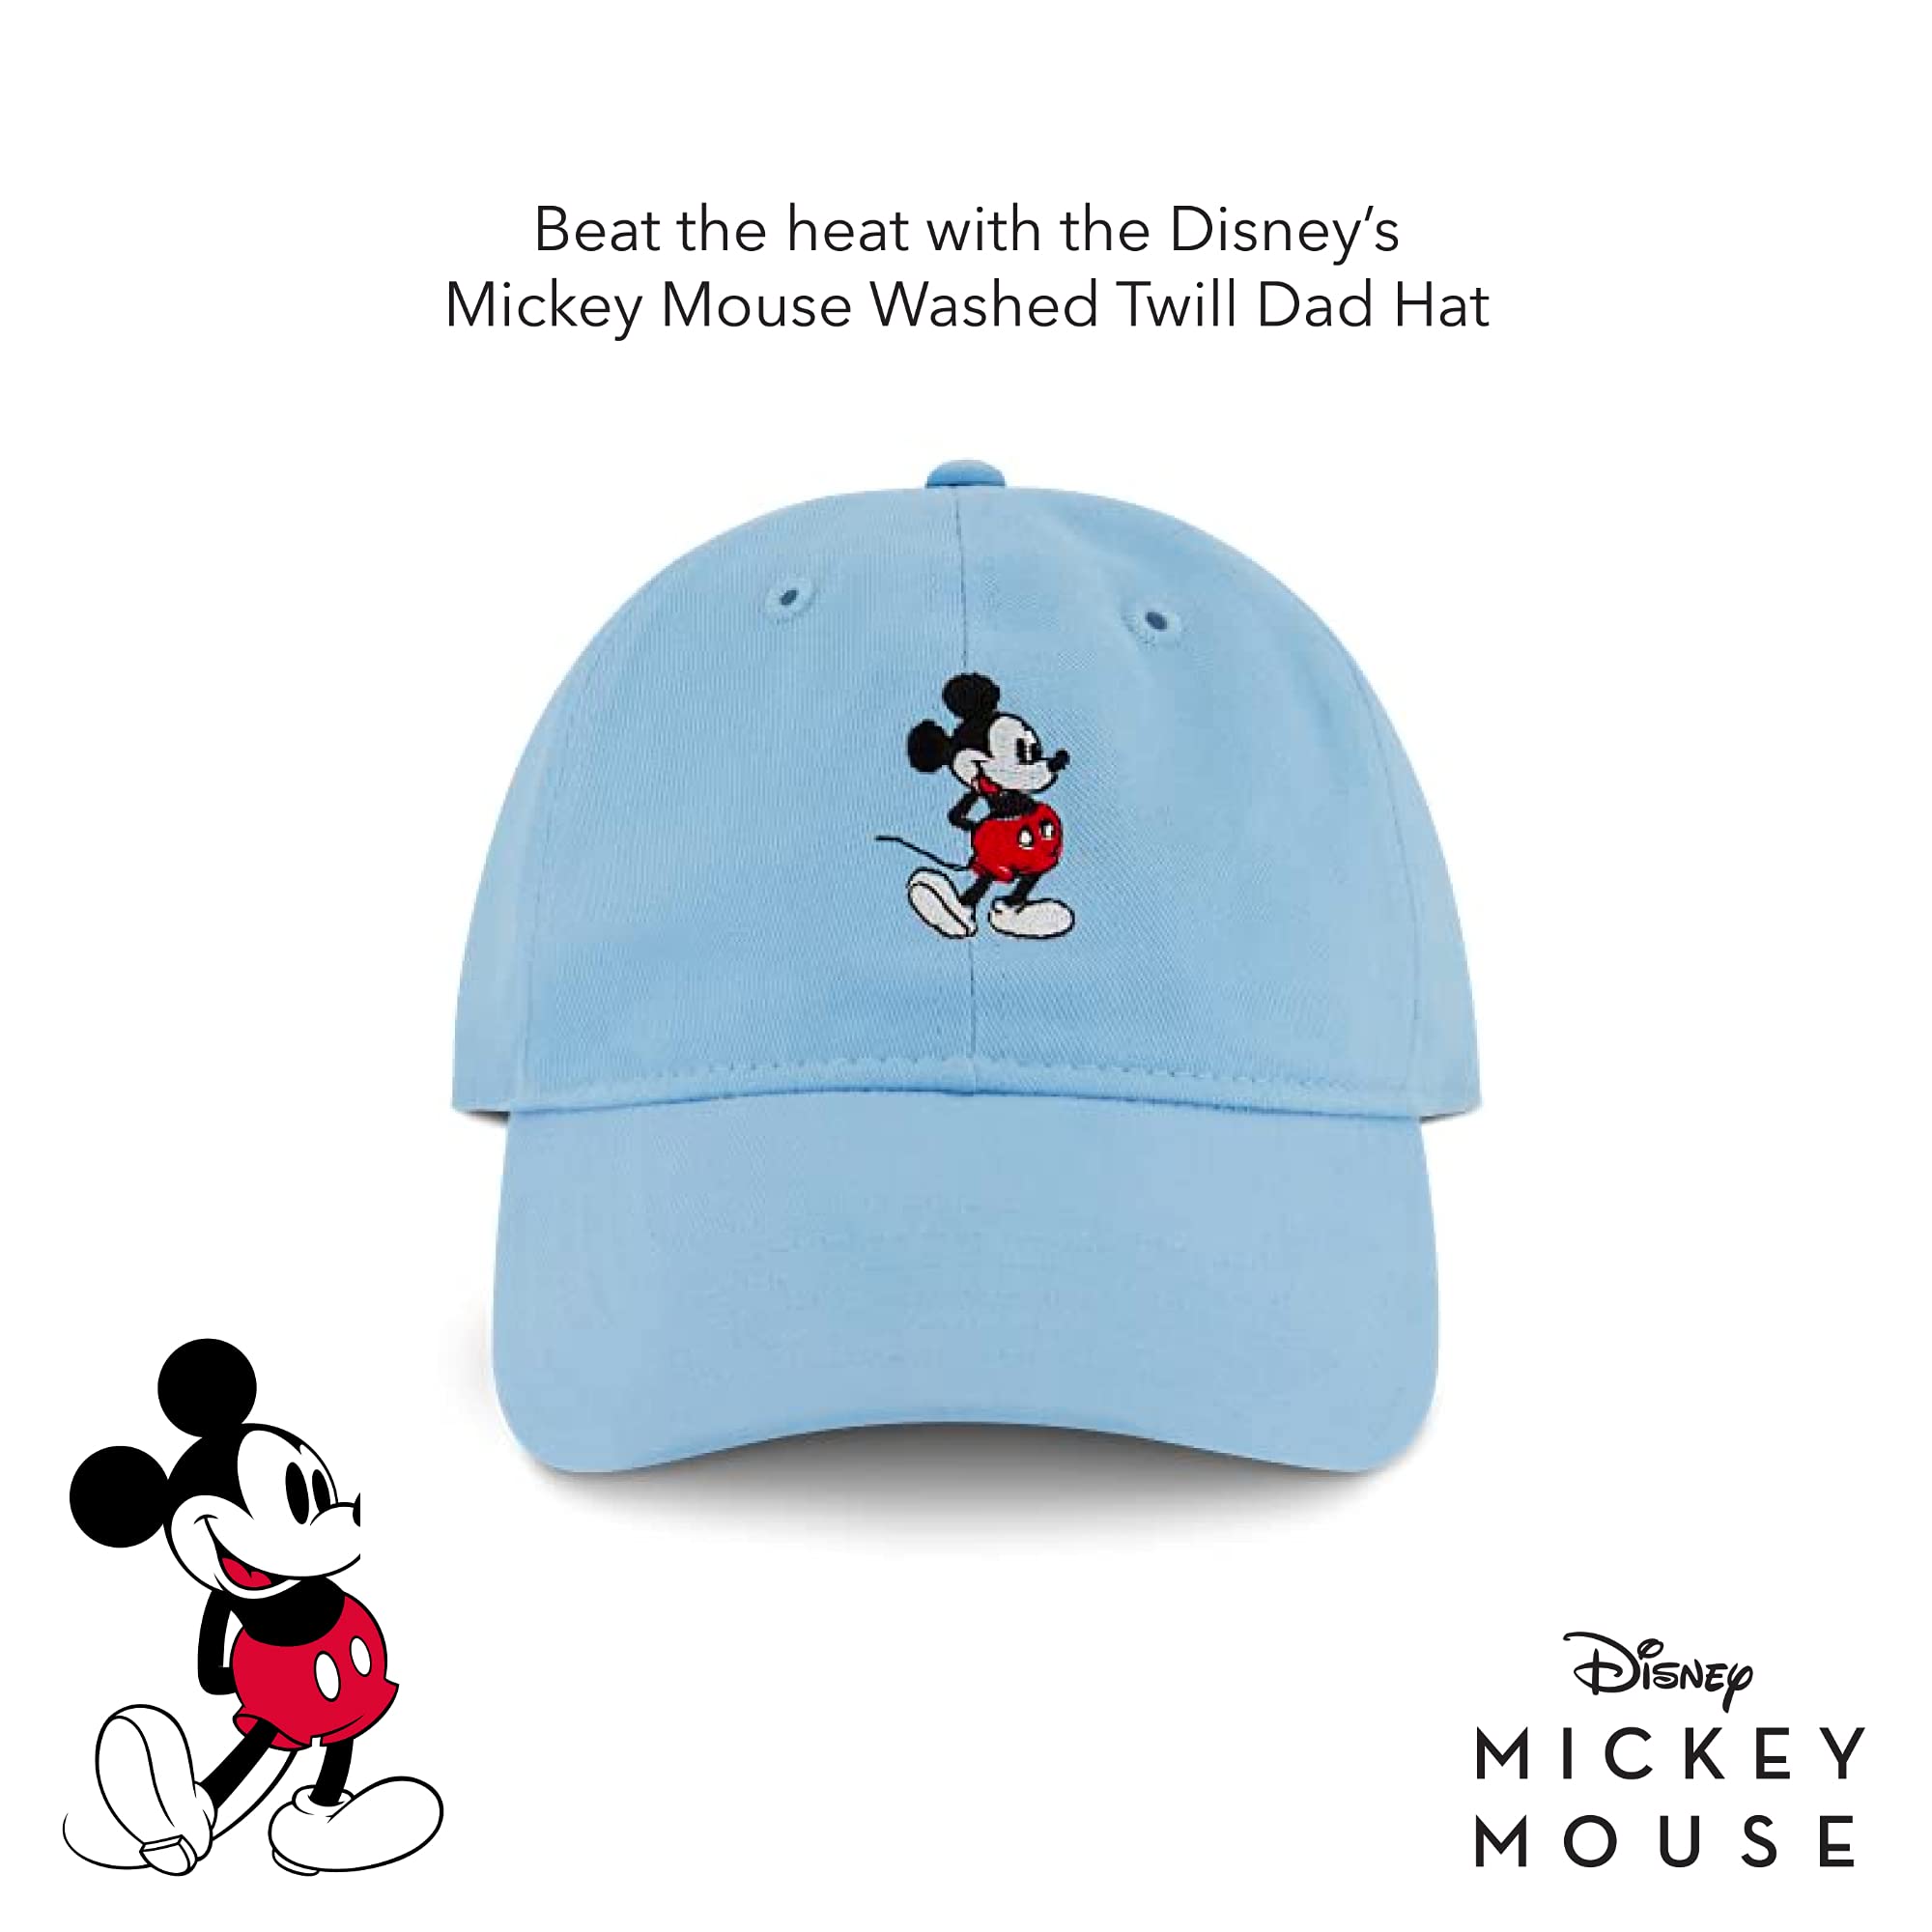 Disney Mickey Mouse Baseball Hat, Washed Twill Cotton Adjustable Dad Cap